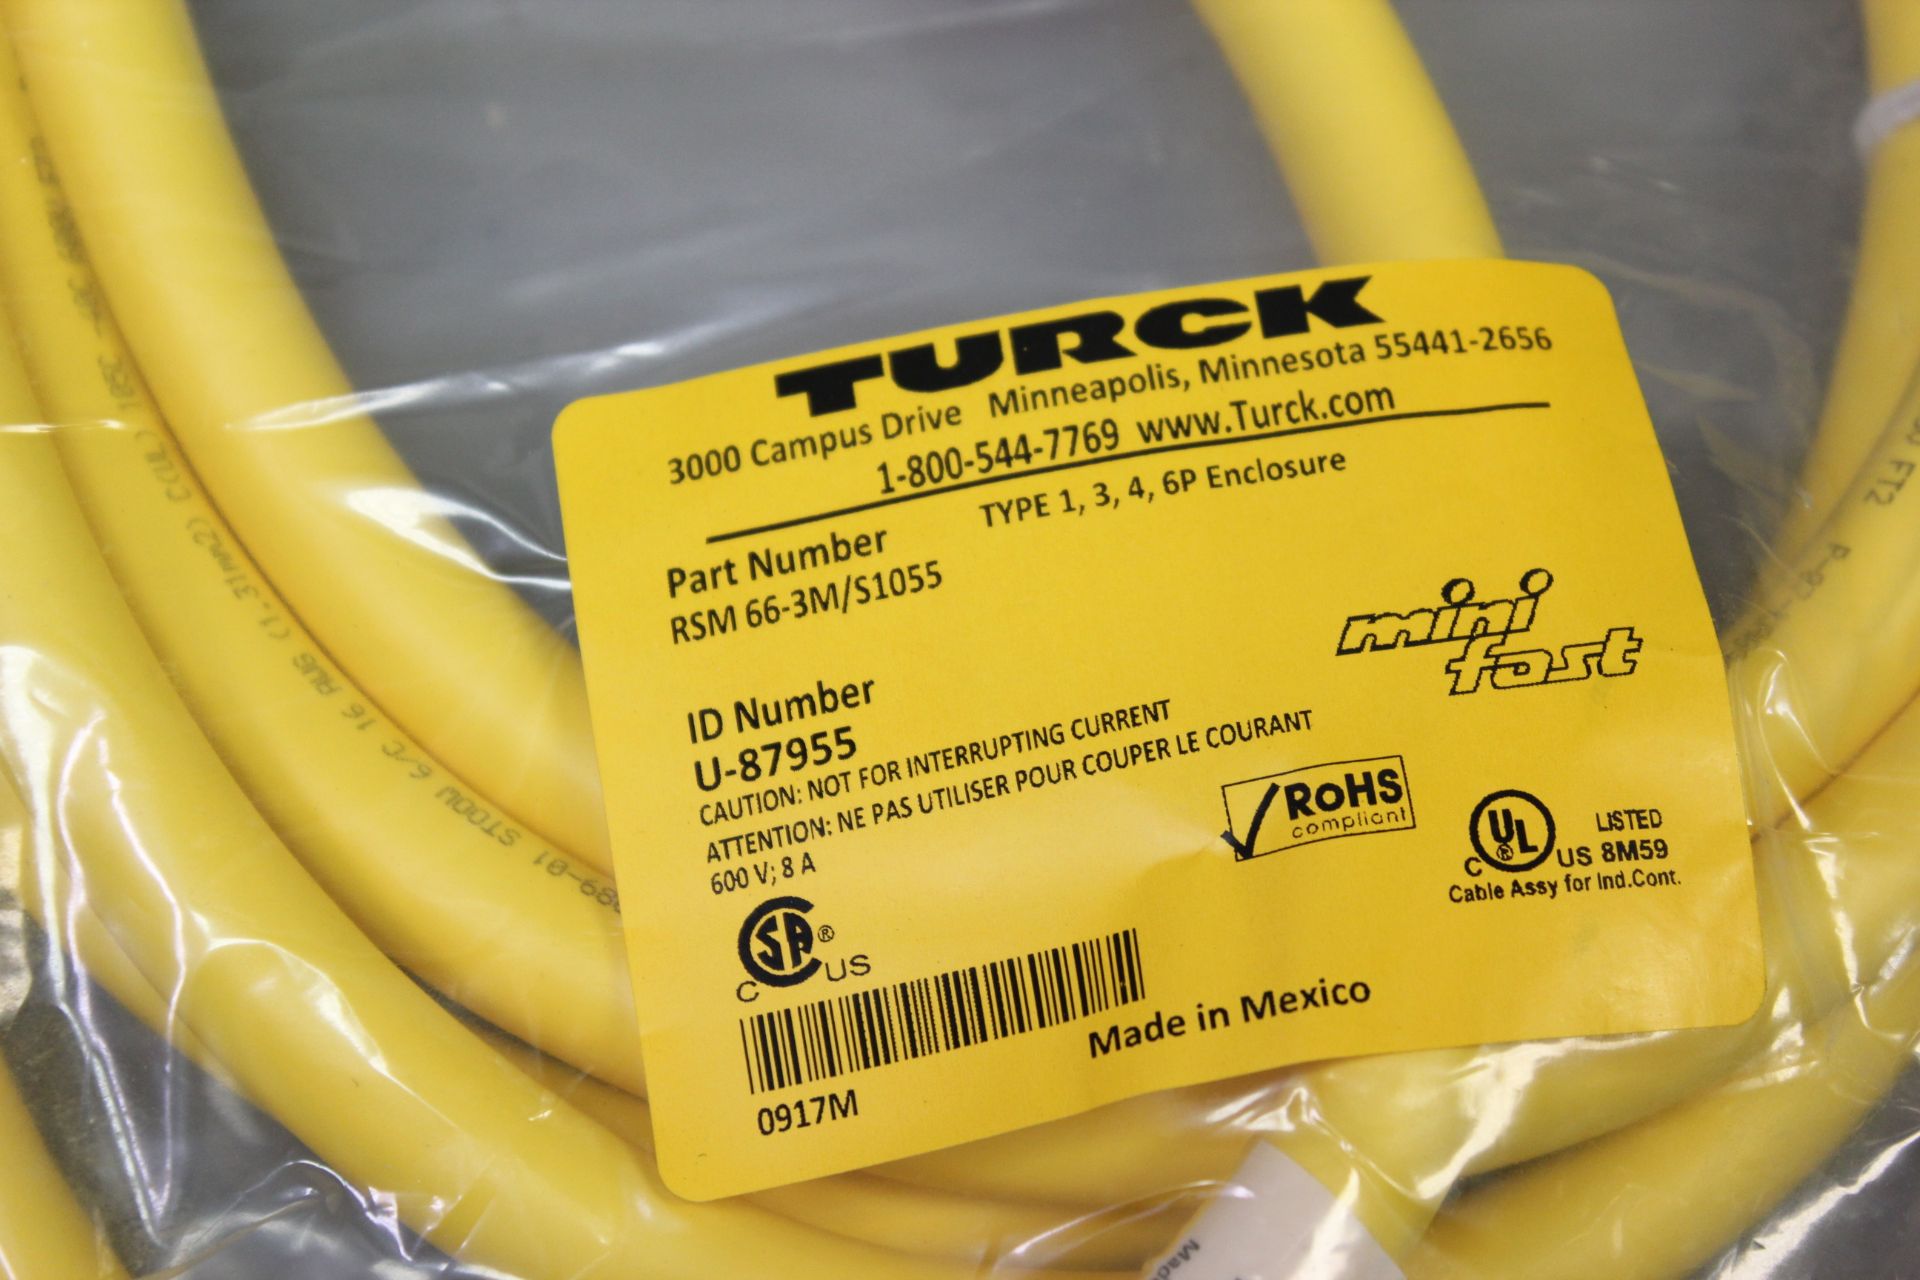 3 NEW TURCK CABLE ASSEMBLIES - Image 2 of 3